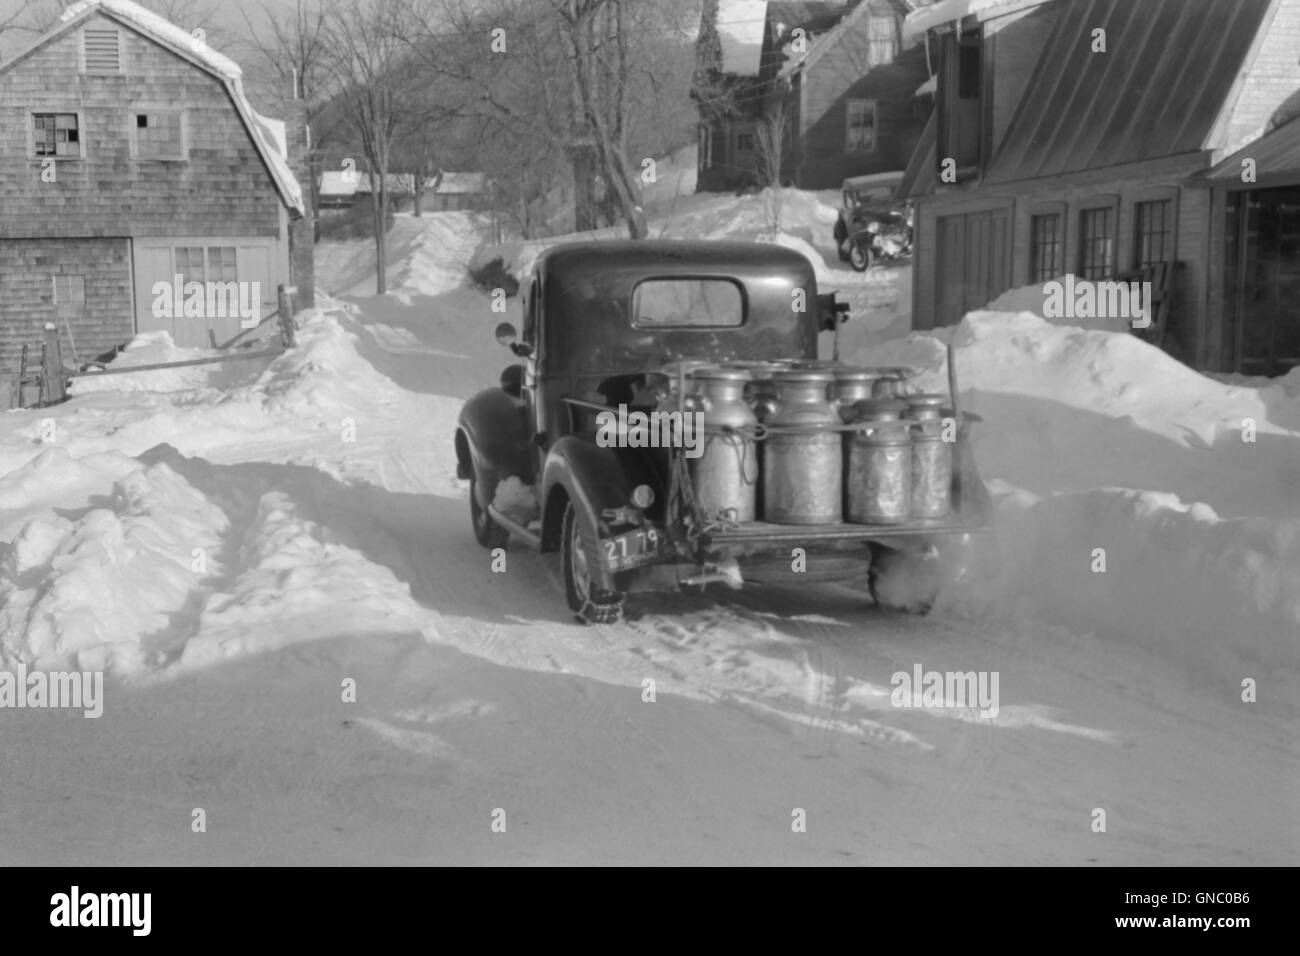 Farmer Delivering Milk Cans in Truck, near Woodstock, Vermont, USA, Marion Post Wolcott for Farm Security Administration, March 1940 Stock Photo